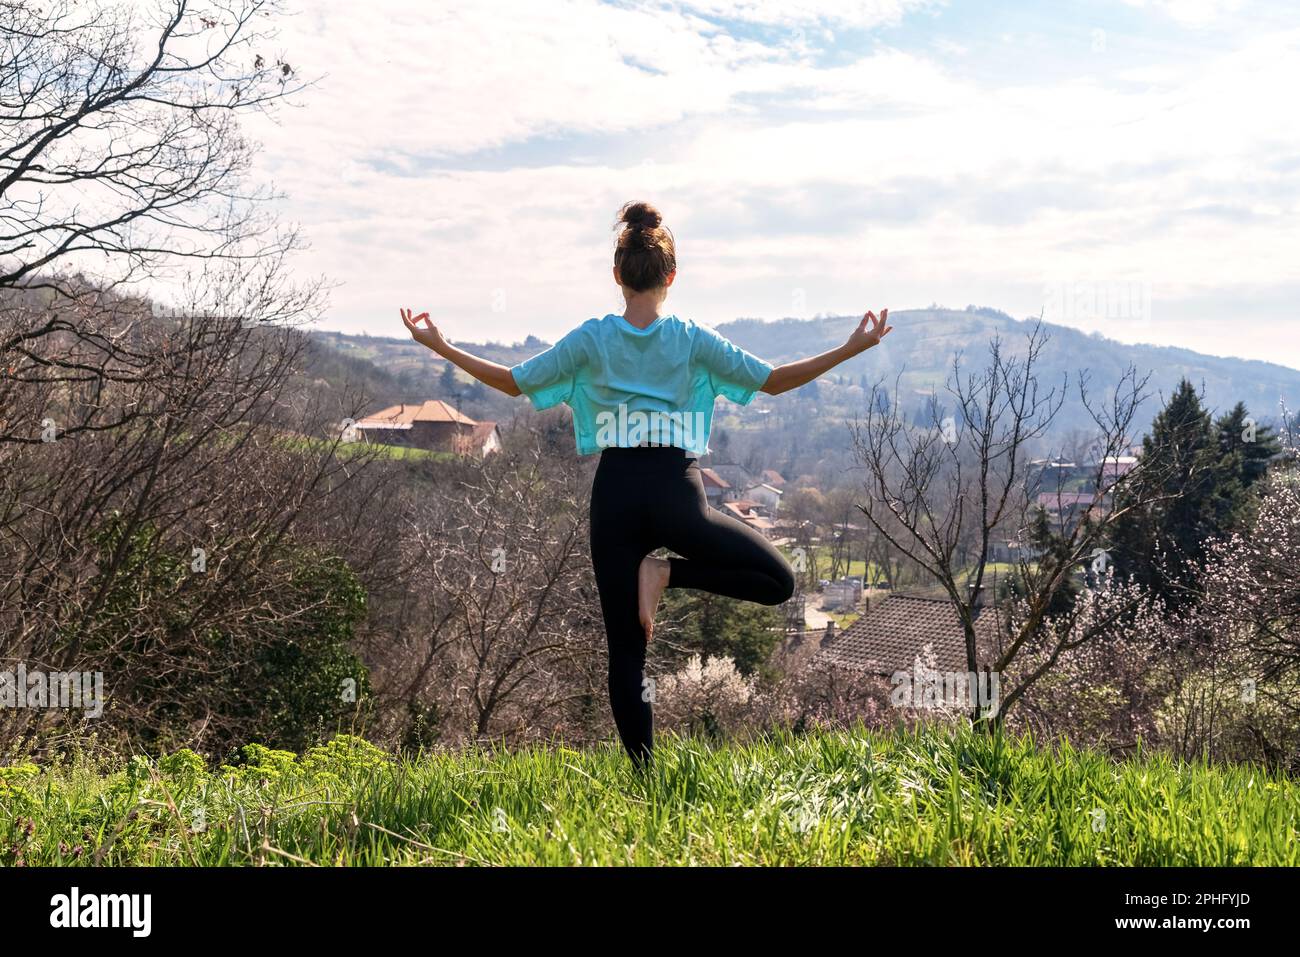 woman stands on hill in yoga pose against mountain and meditating 2PHFYJD